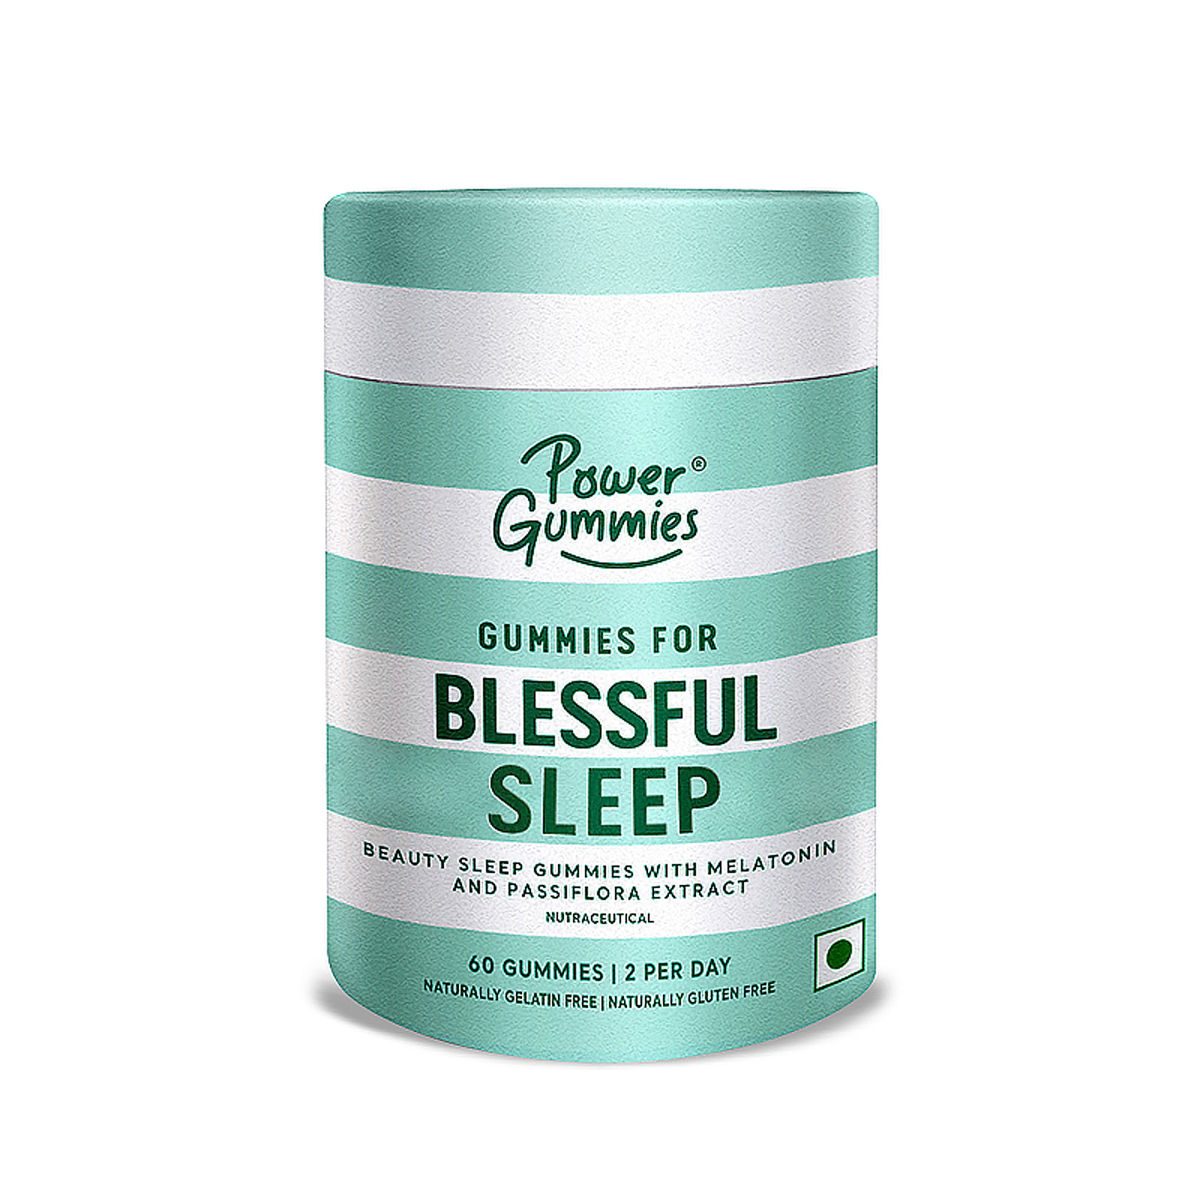 Buy Power Gummies Blessful Sleep Passion Fruit Flavour Gummies, 60 Count Online